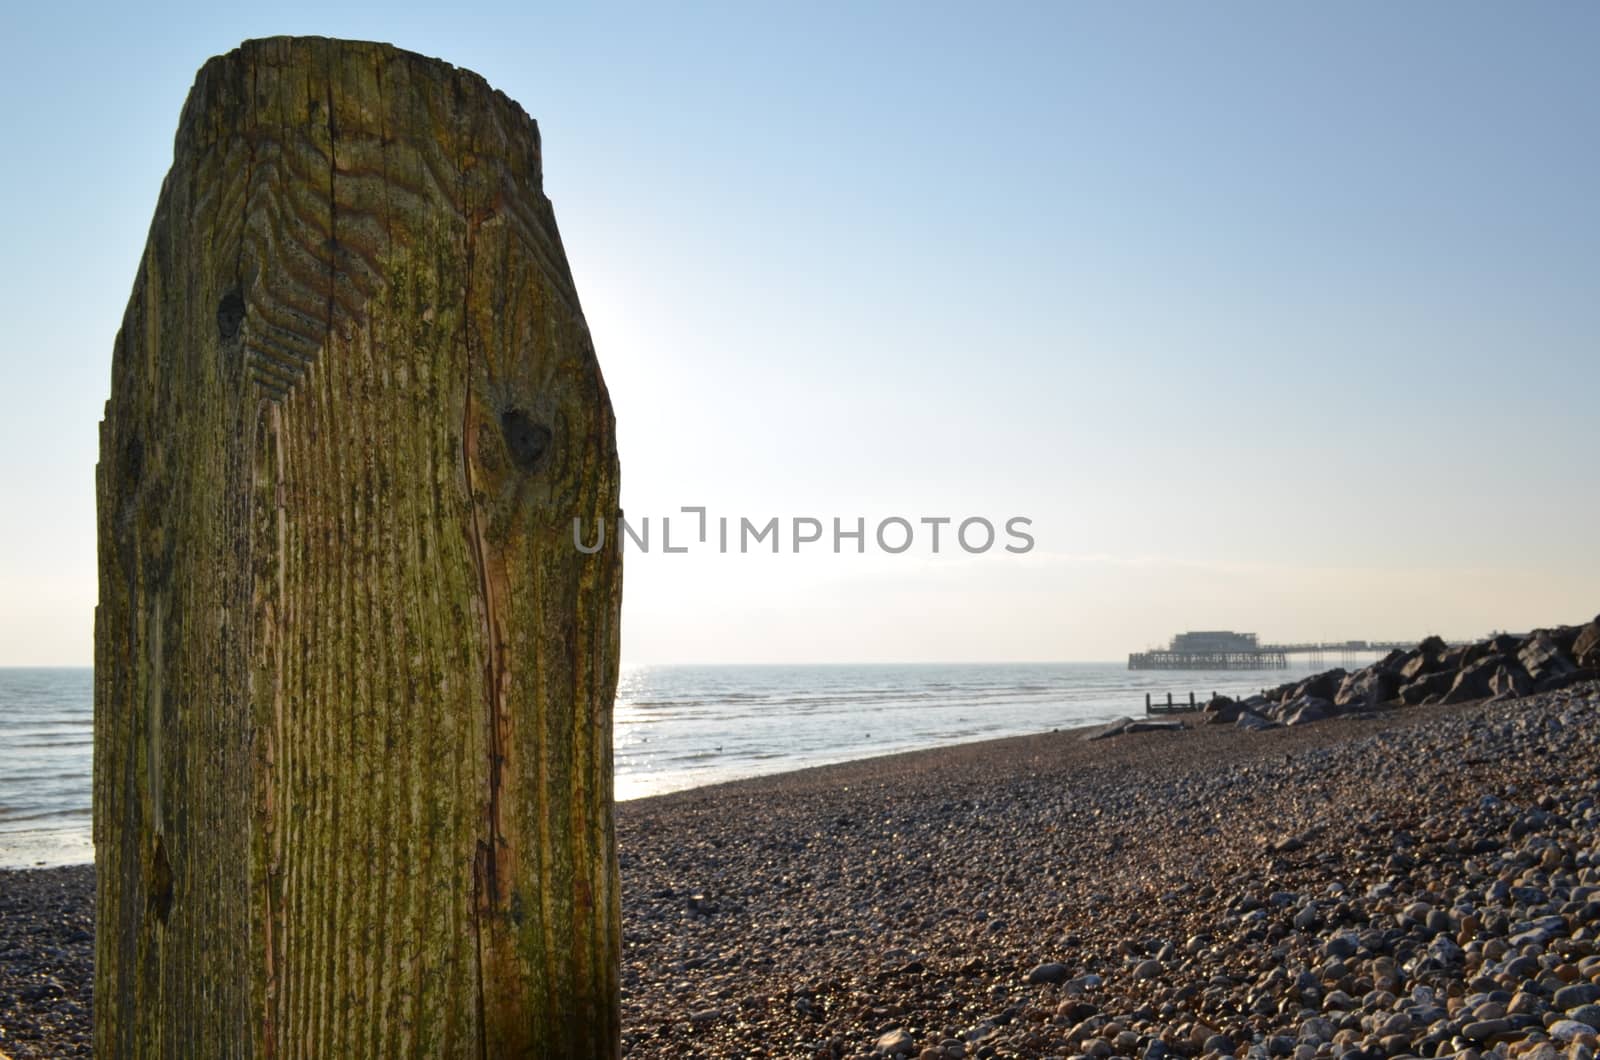 Wooden coastal breakwater along the beach at Worthing,Sussex with the Victorian pier in the background.